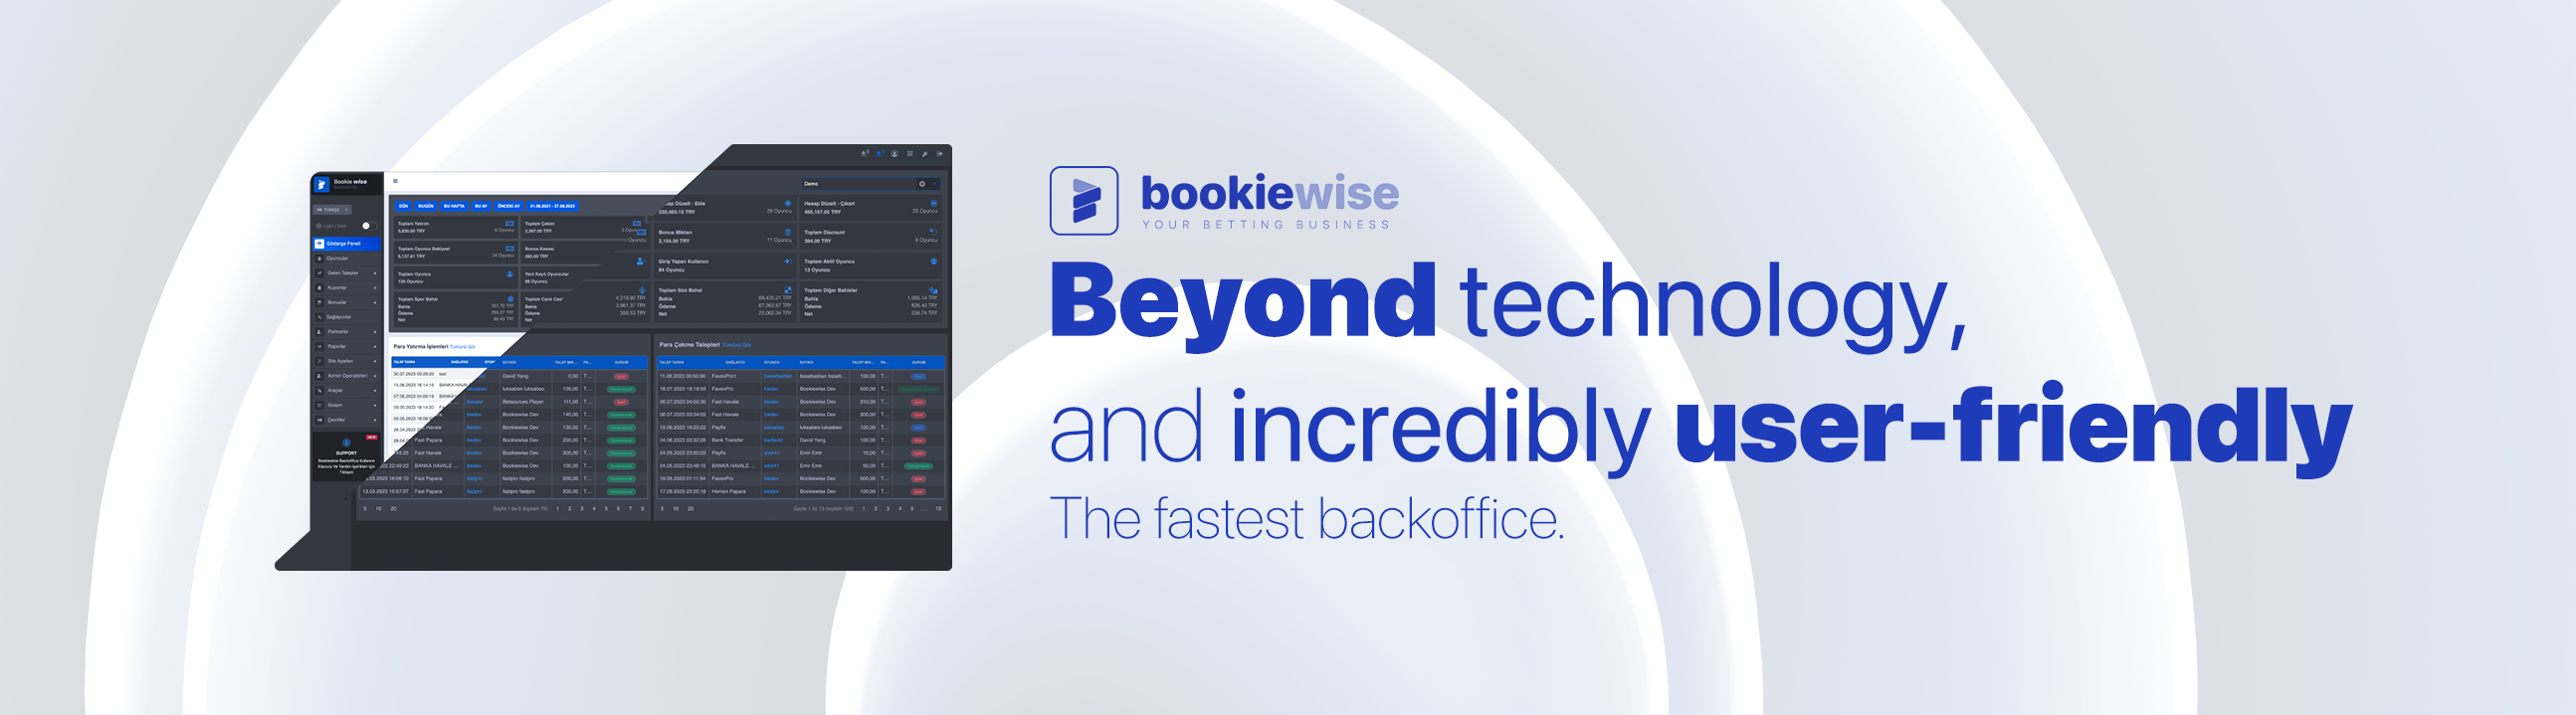 Bookiewise Technology